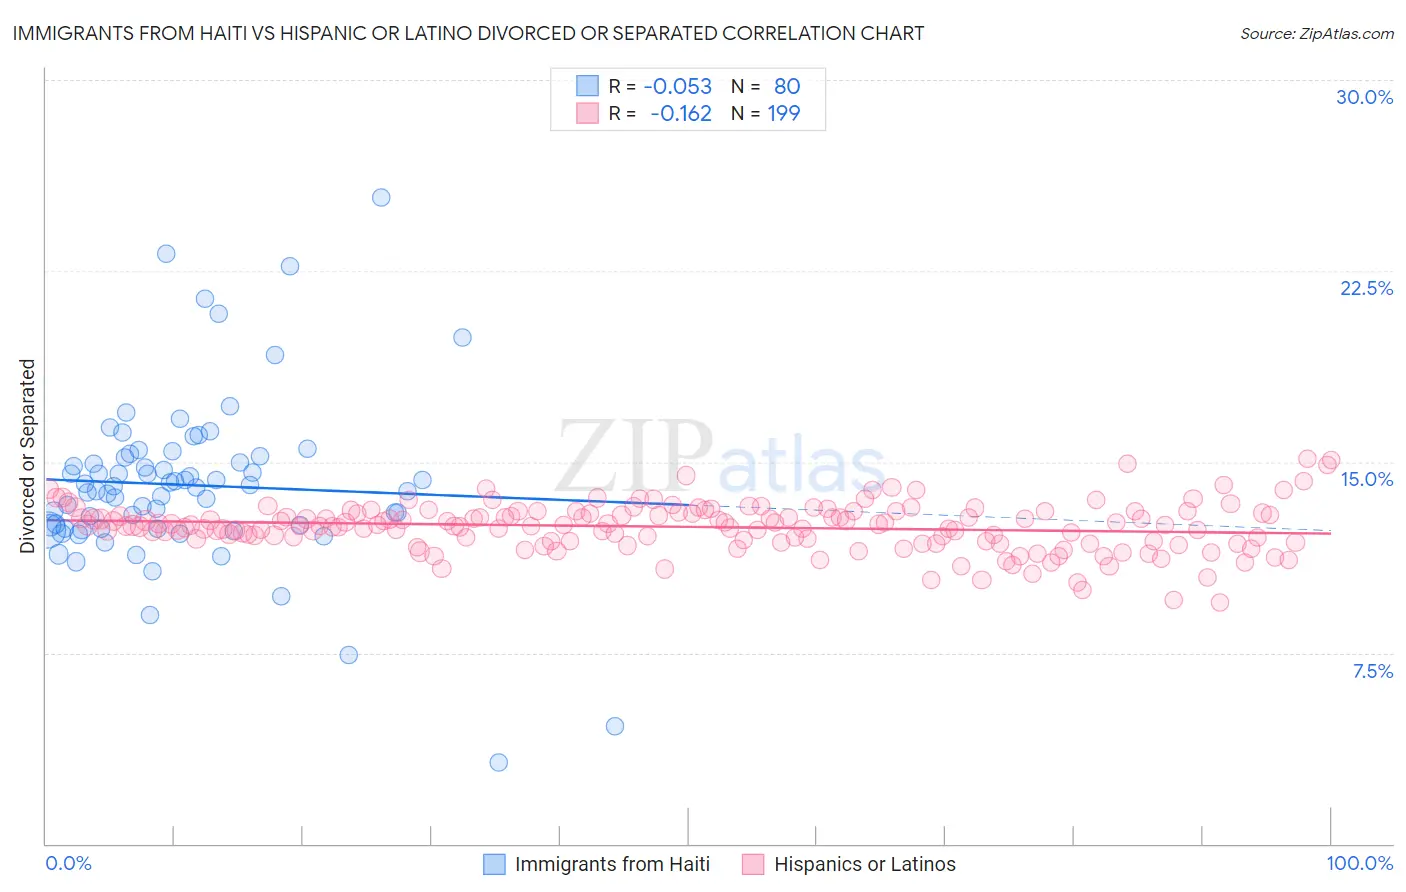 Immigrants from Haiti vs Hispanic or Latino Divorced or Separated